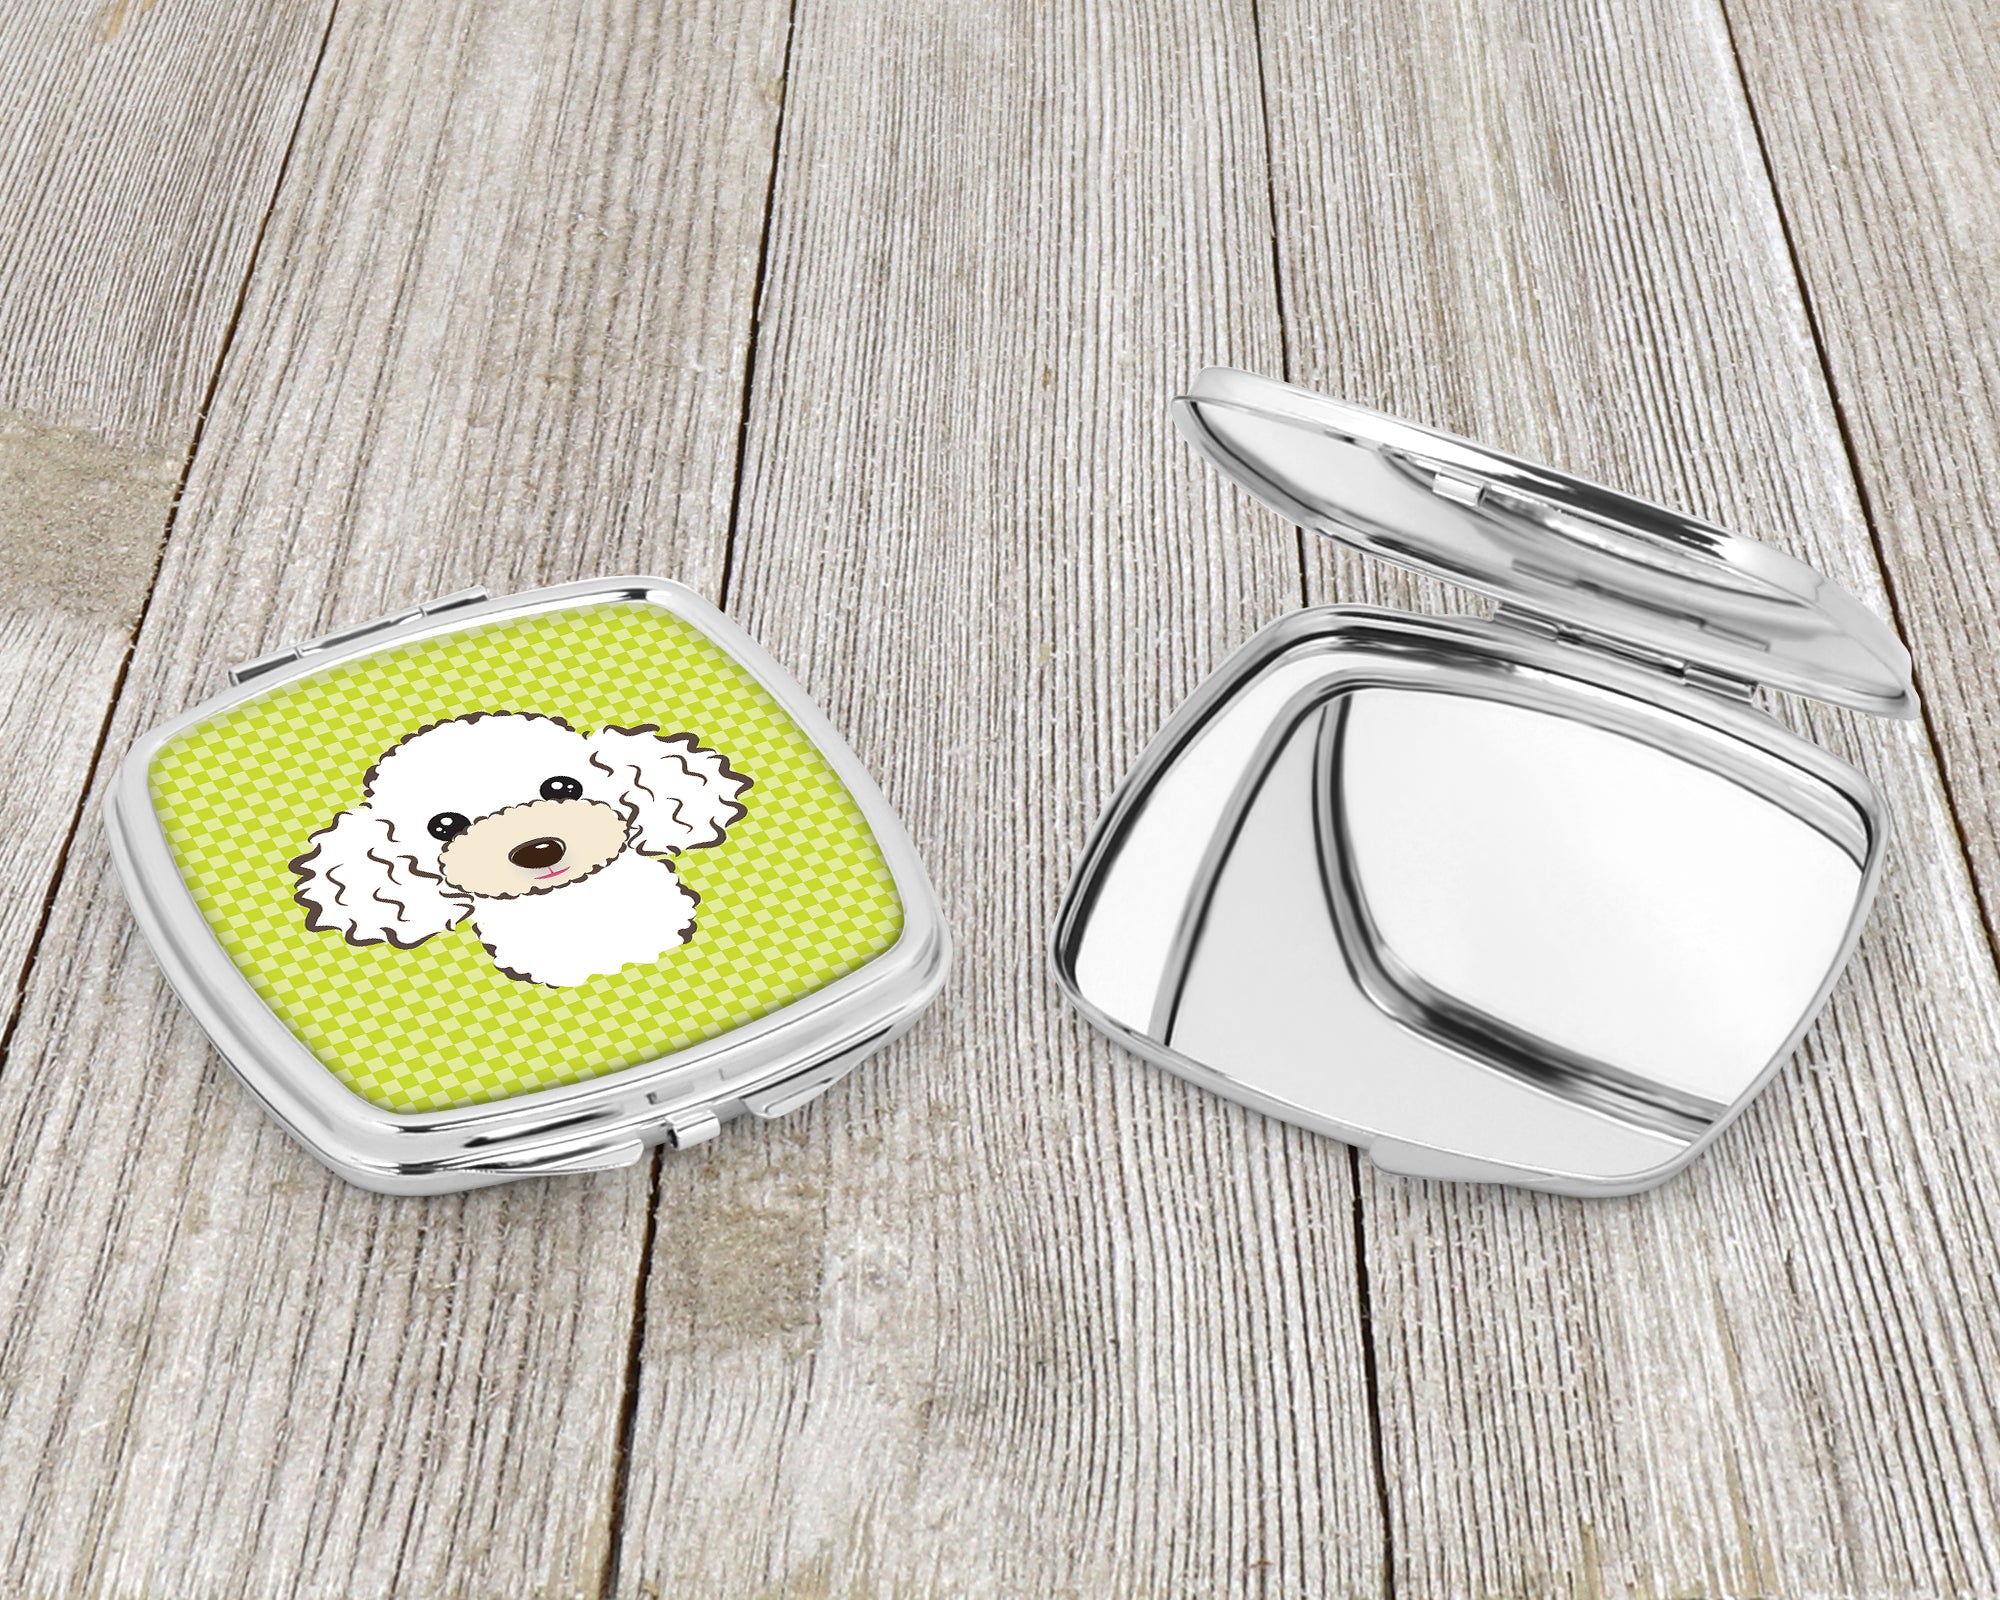 Checkerboard Lime Green White Poodle Compact Mirror BB1319SCM  the-store.com.